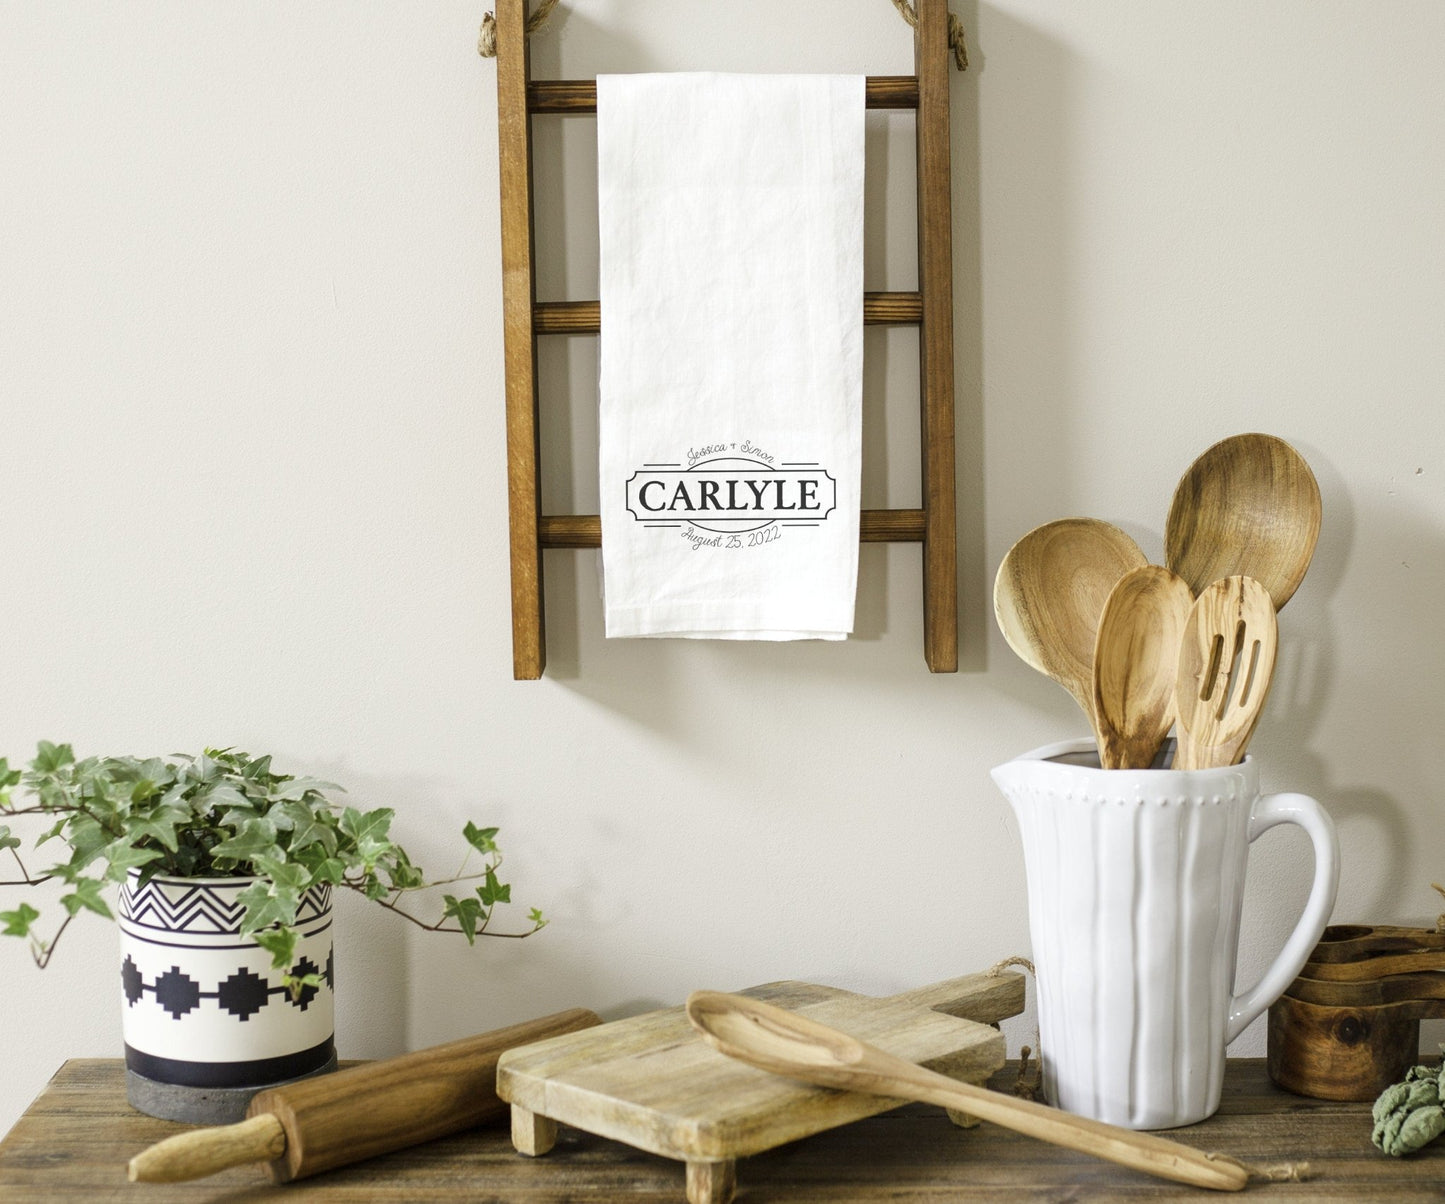 Load image into Gallery viewer, Housewarming Gift Idea | Personalized Family Name and Established Date Linen Tea Towel | Custom Gift For Couple | Custom Wedding Gift Idea
